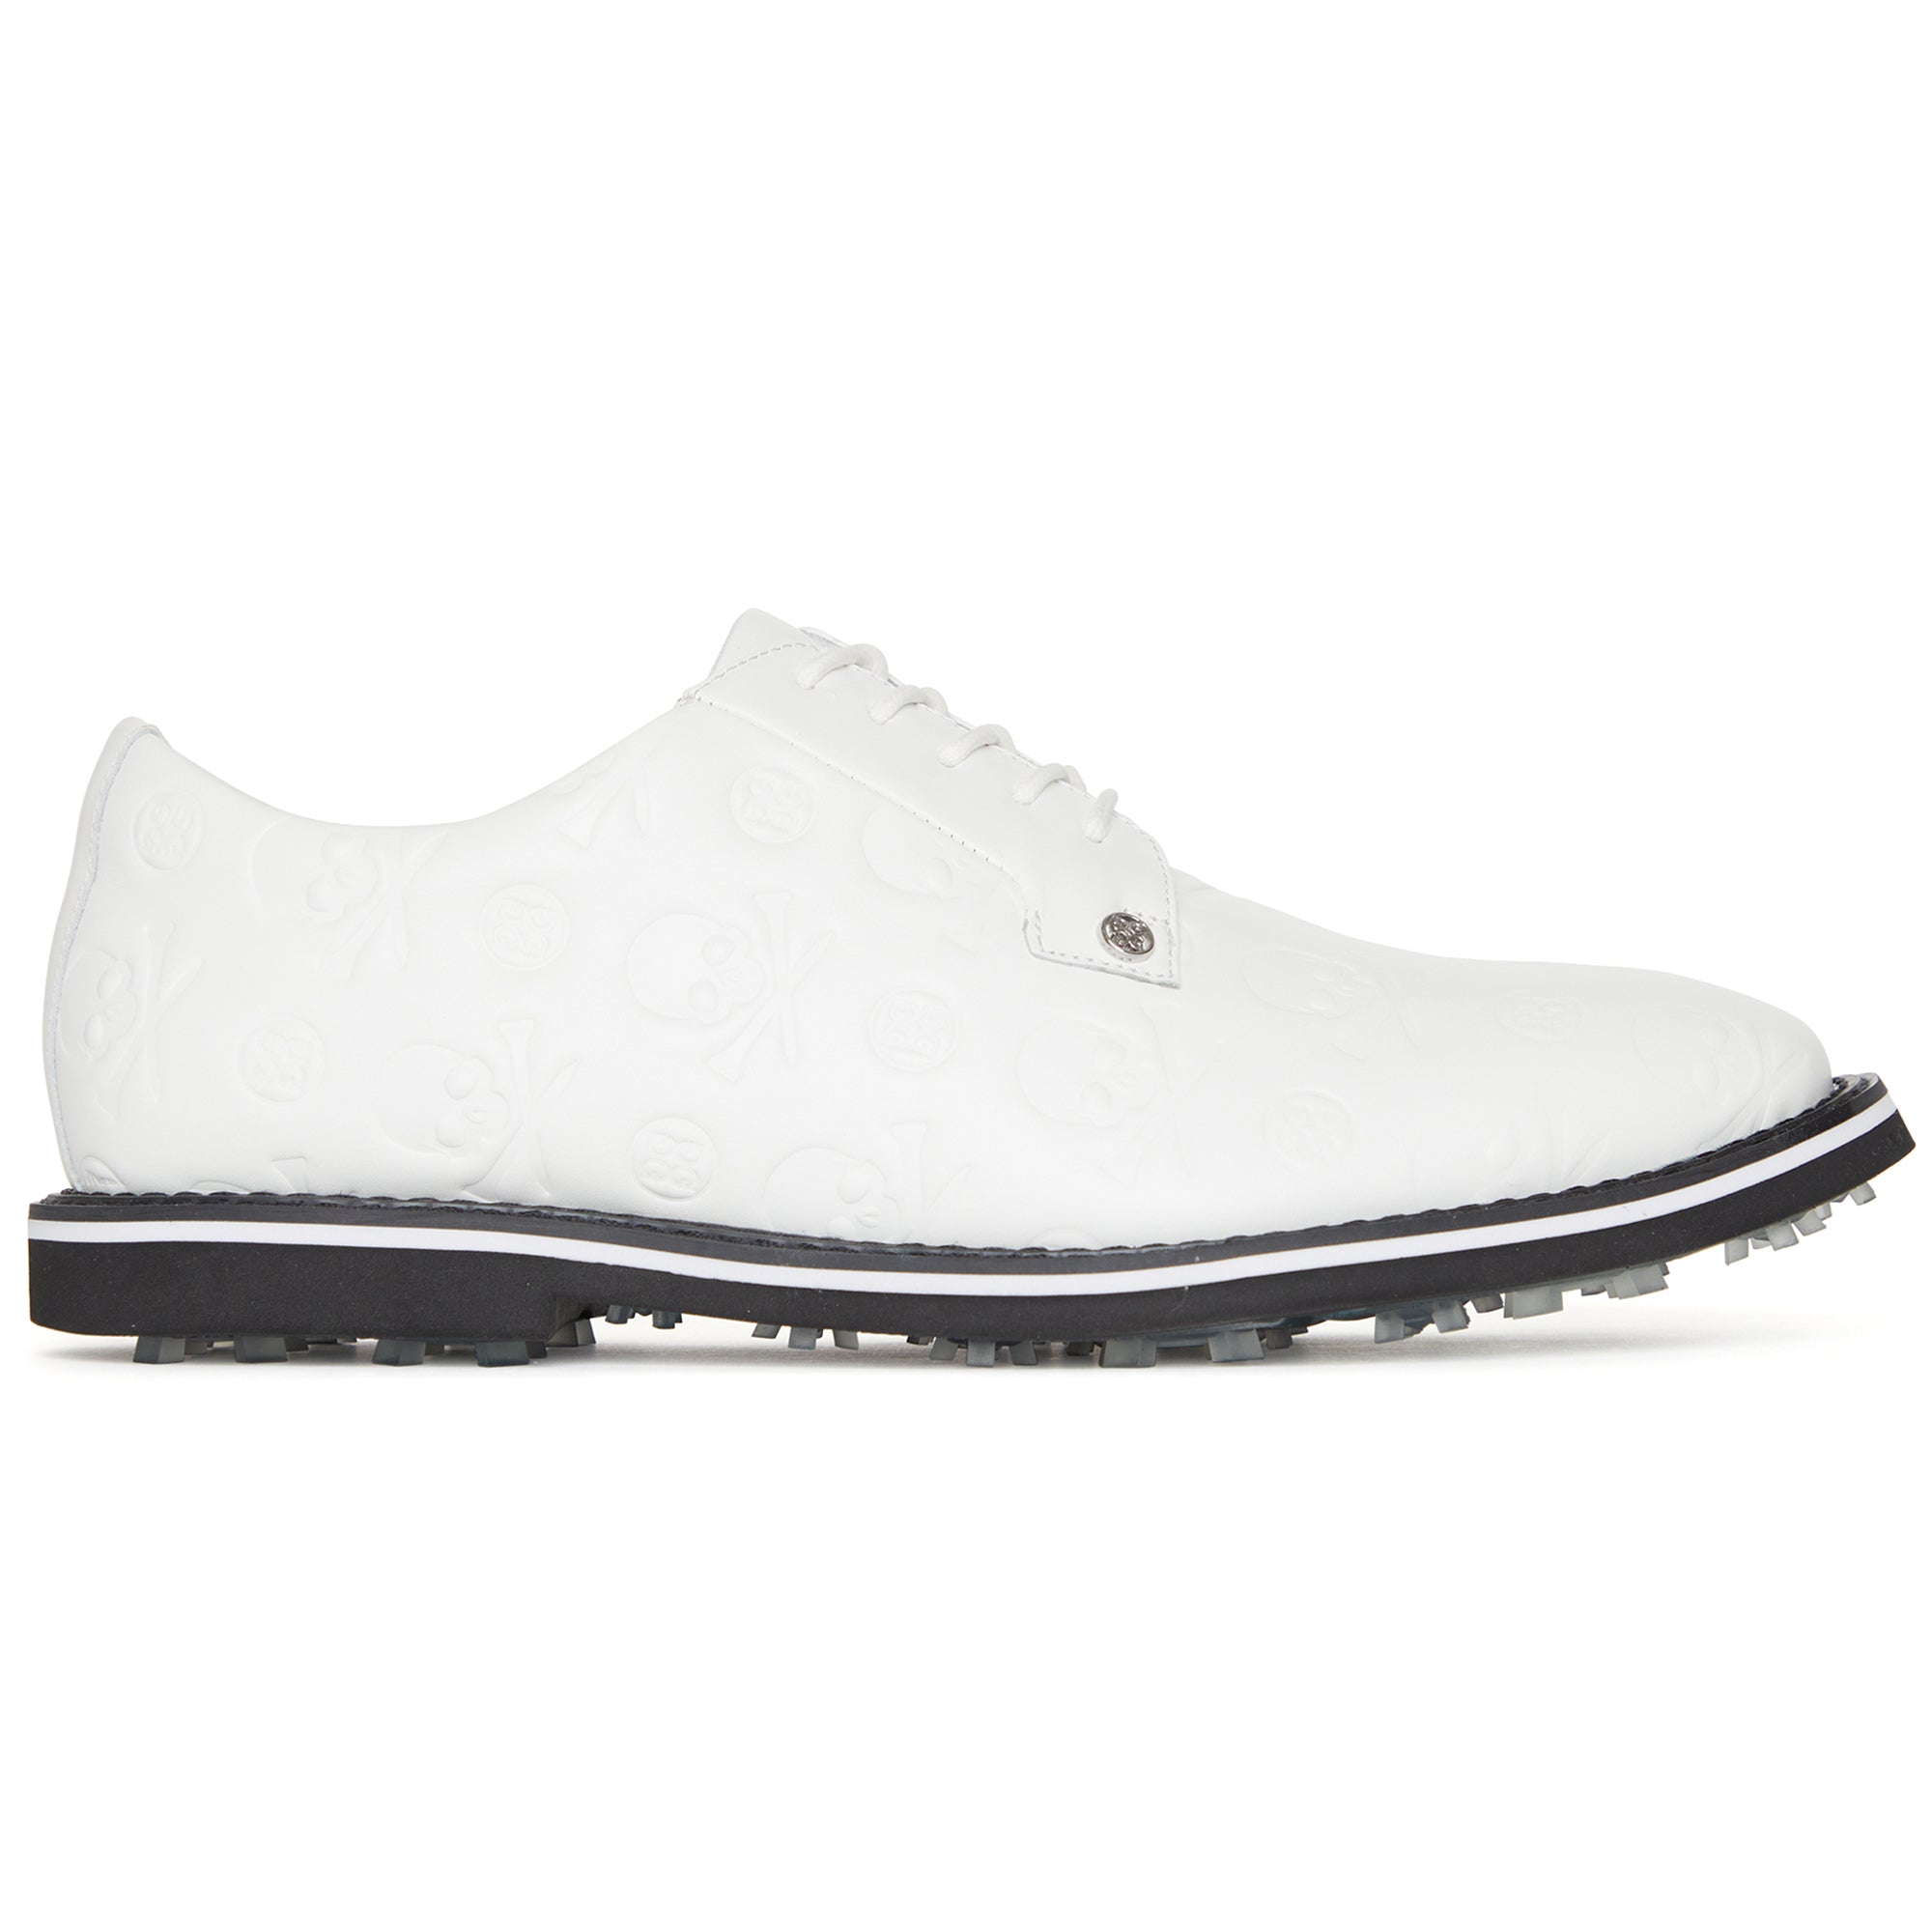 g-fore-gallivanter-debossed-leather-golf-shoes-gmf000001-snow-onyx-s-onyx